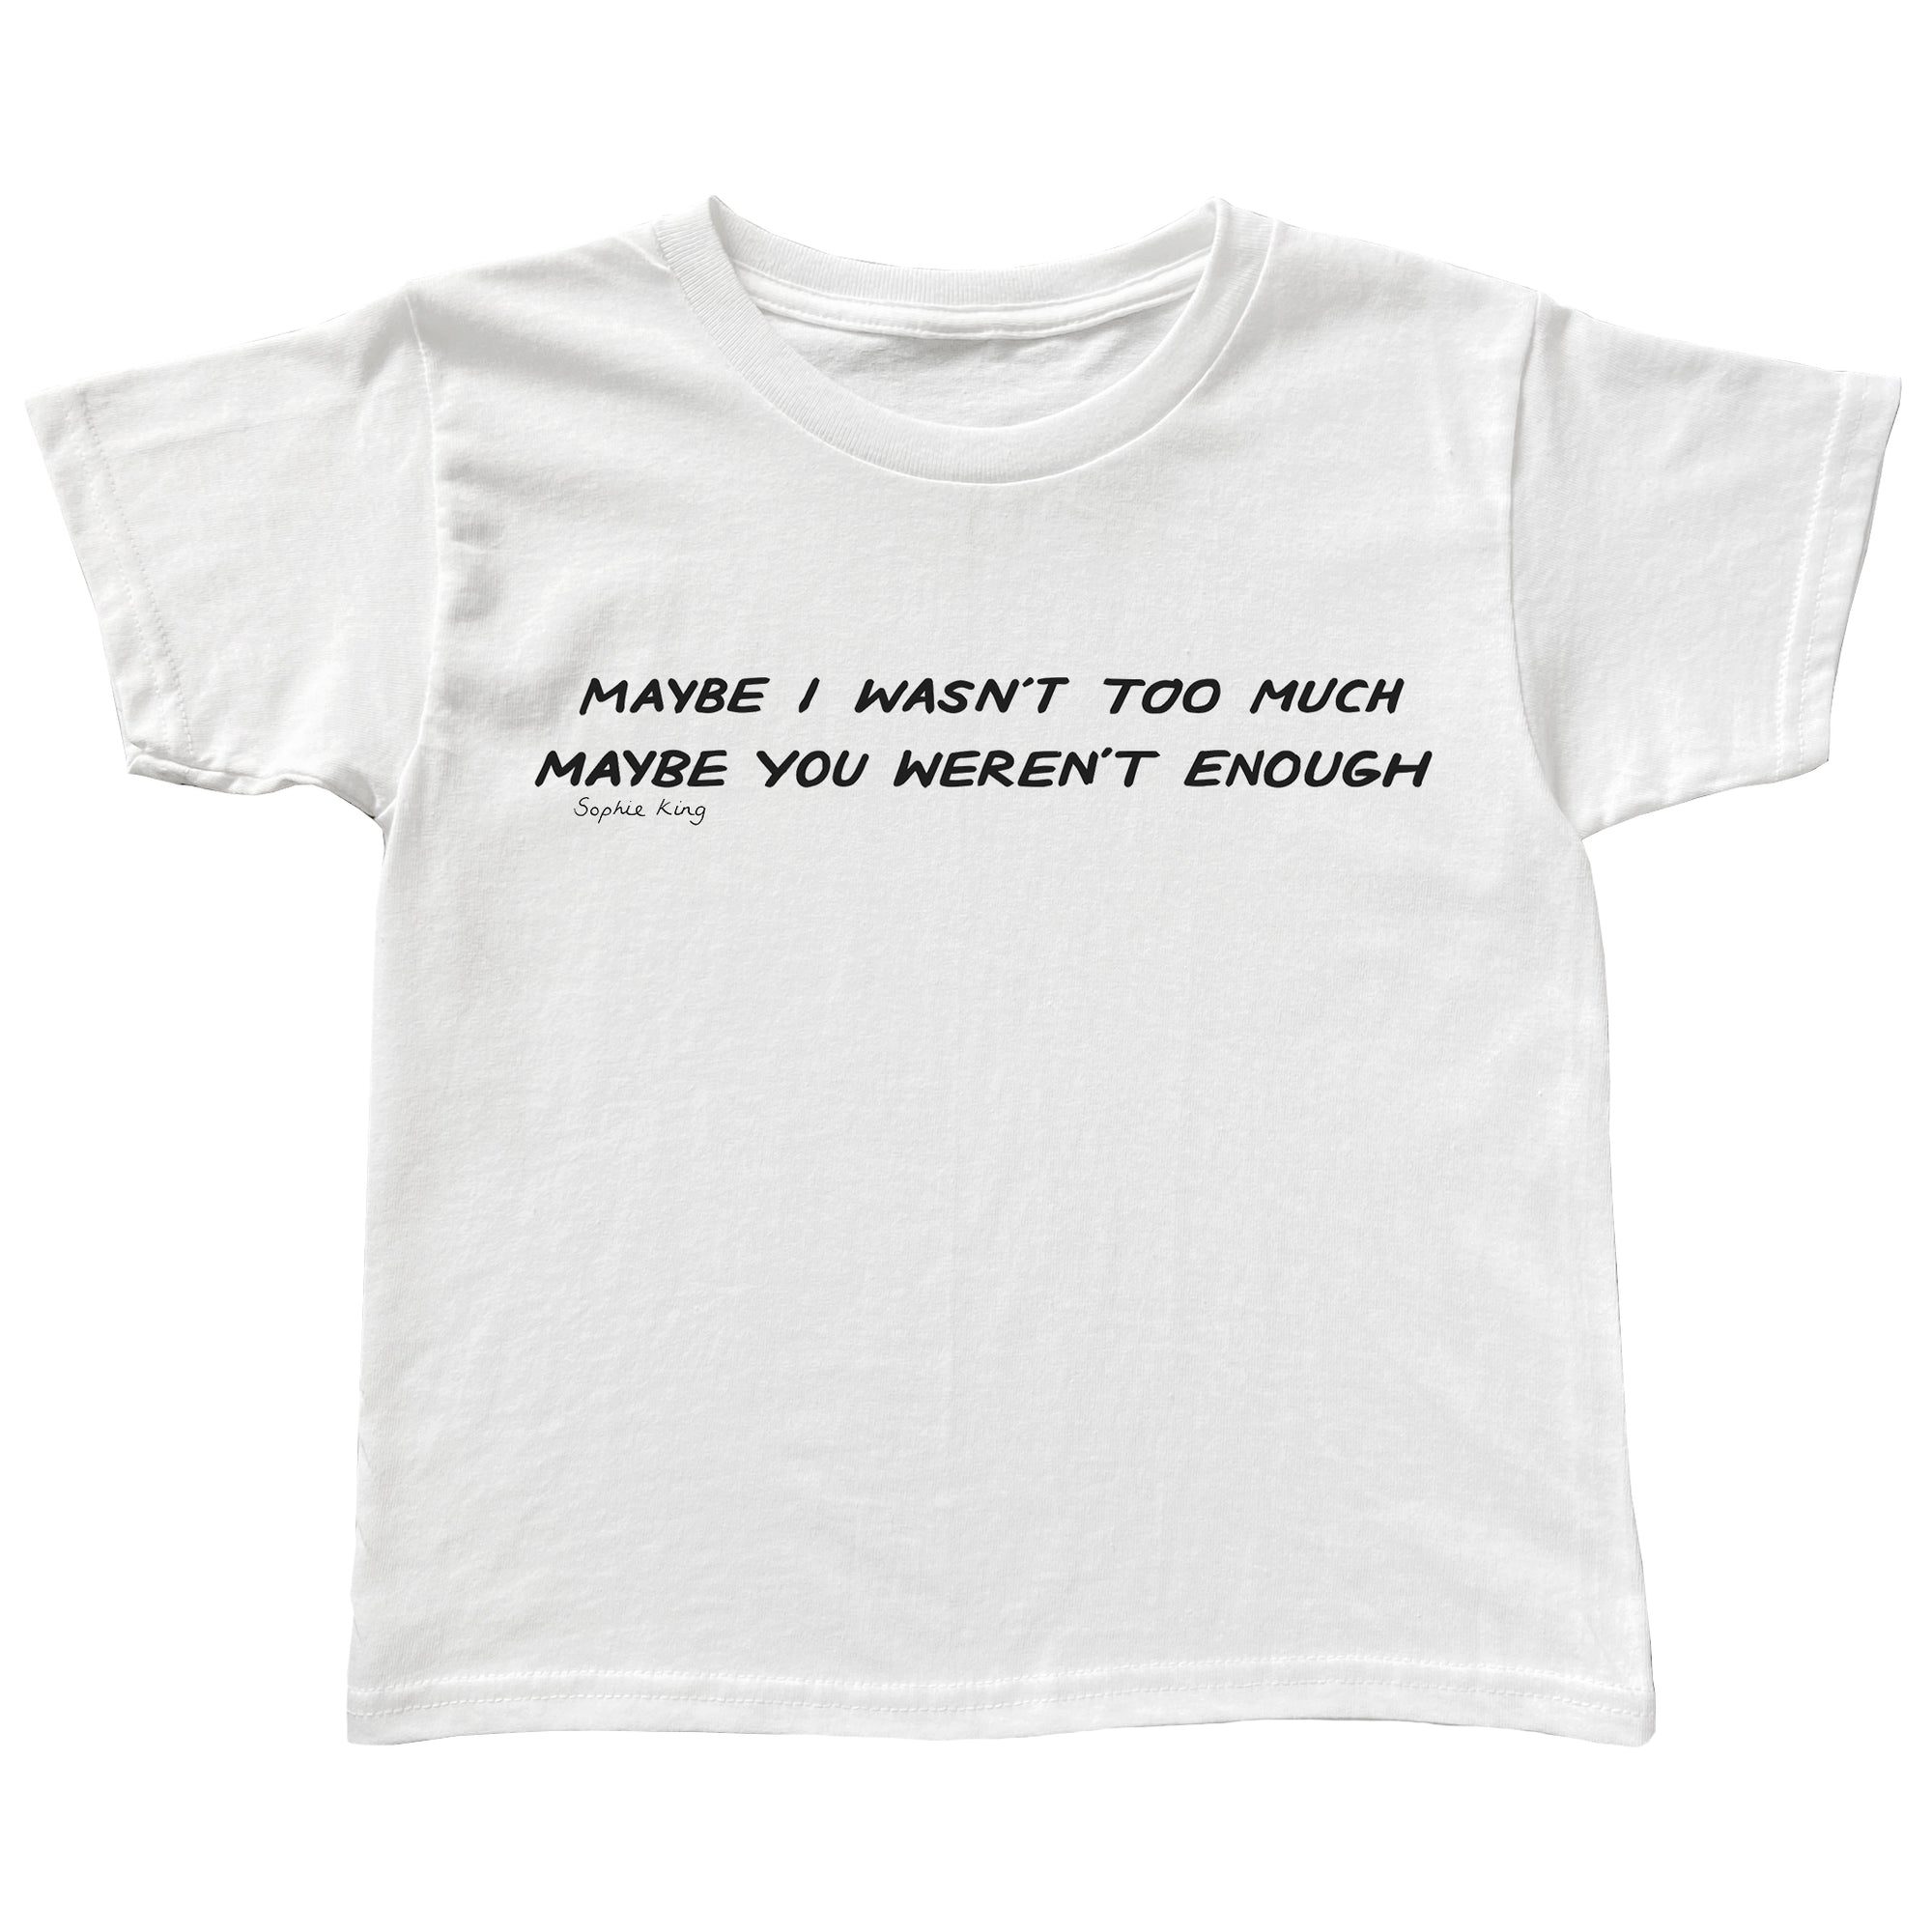 Maybe I wasn't too much (baby tee)